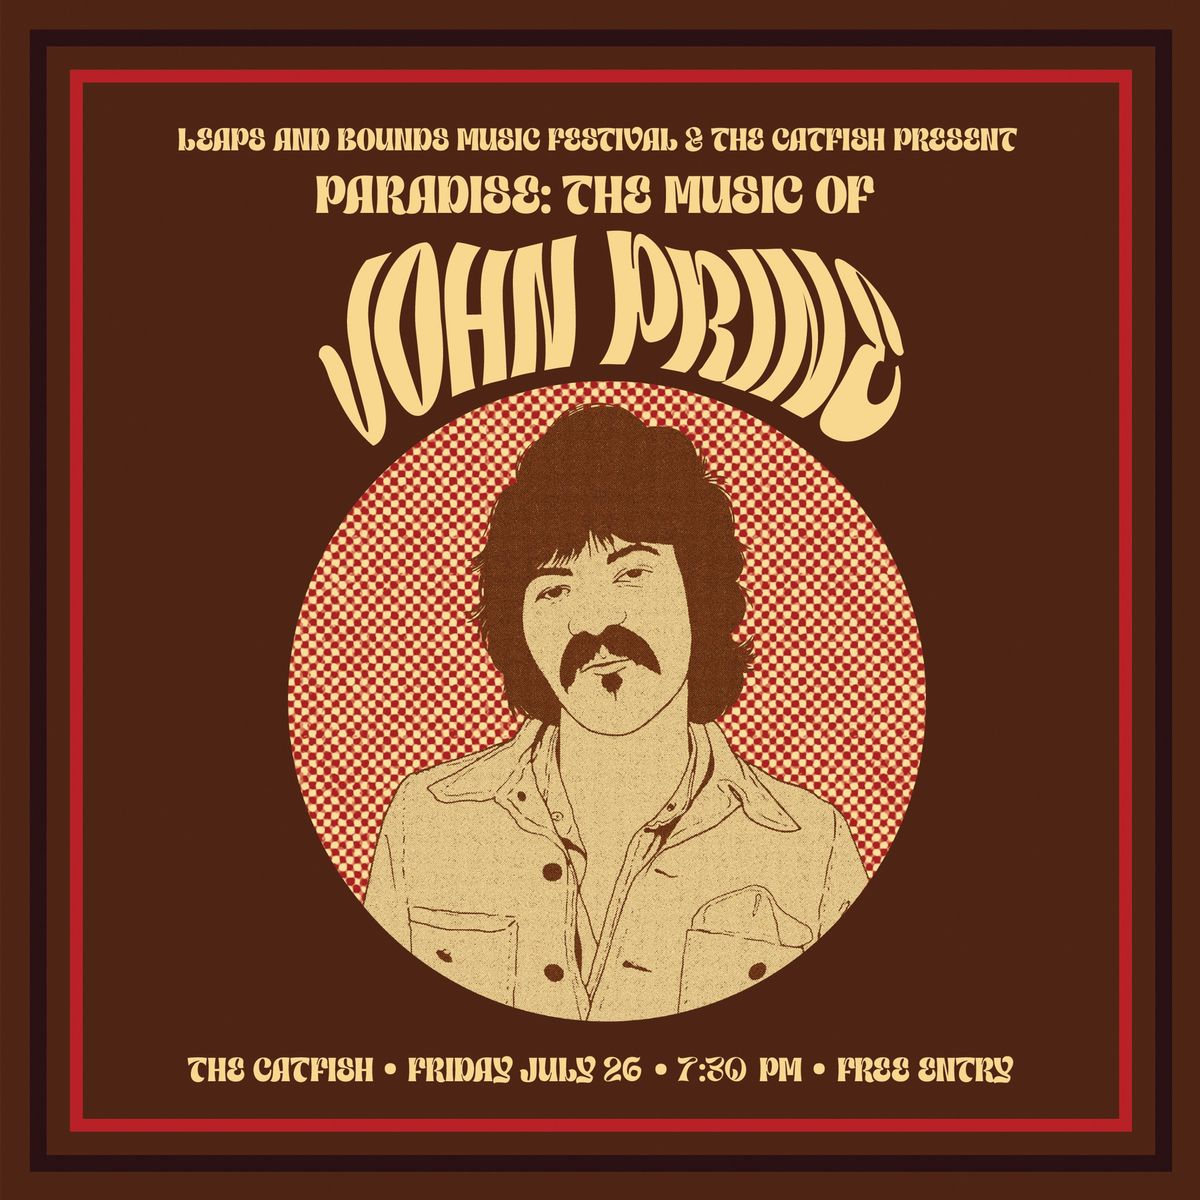 LEAPS AND BOUNDS MUSIC FESTIVAL PRESENTS: PARADISE - THE MUSIC OF JOHN PRINE 